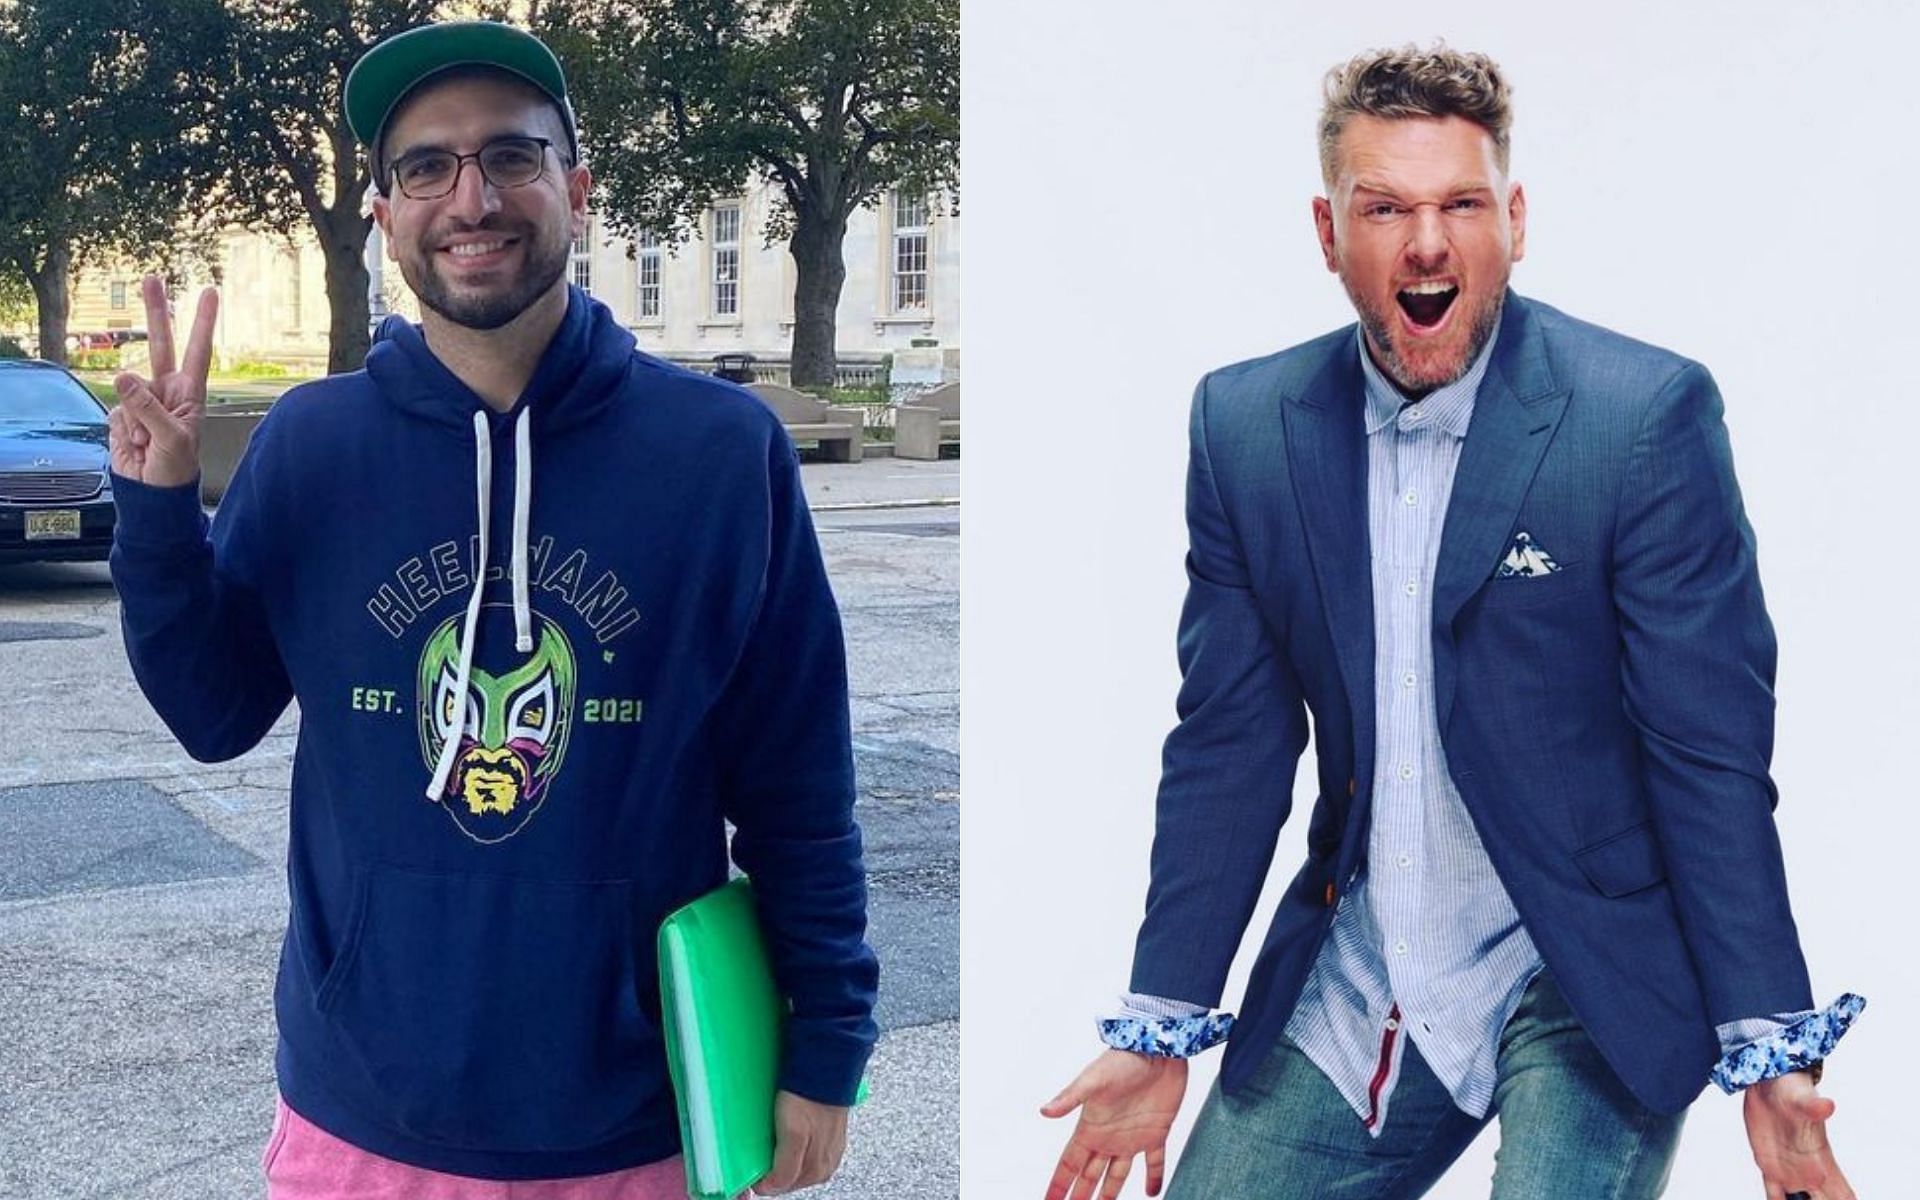 Ariel Helwani (left) and Pat McAfee (right) [Image credits: @patmcafeeshow and @arielhelwani on Instagram]